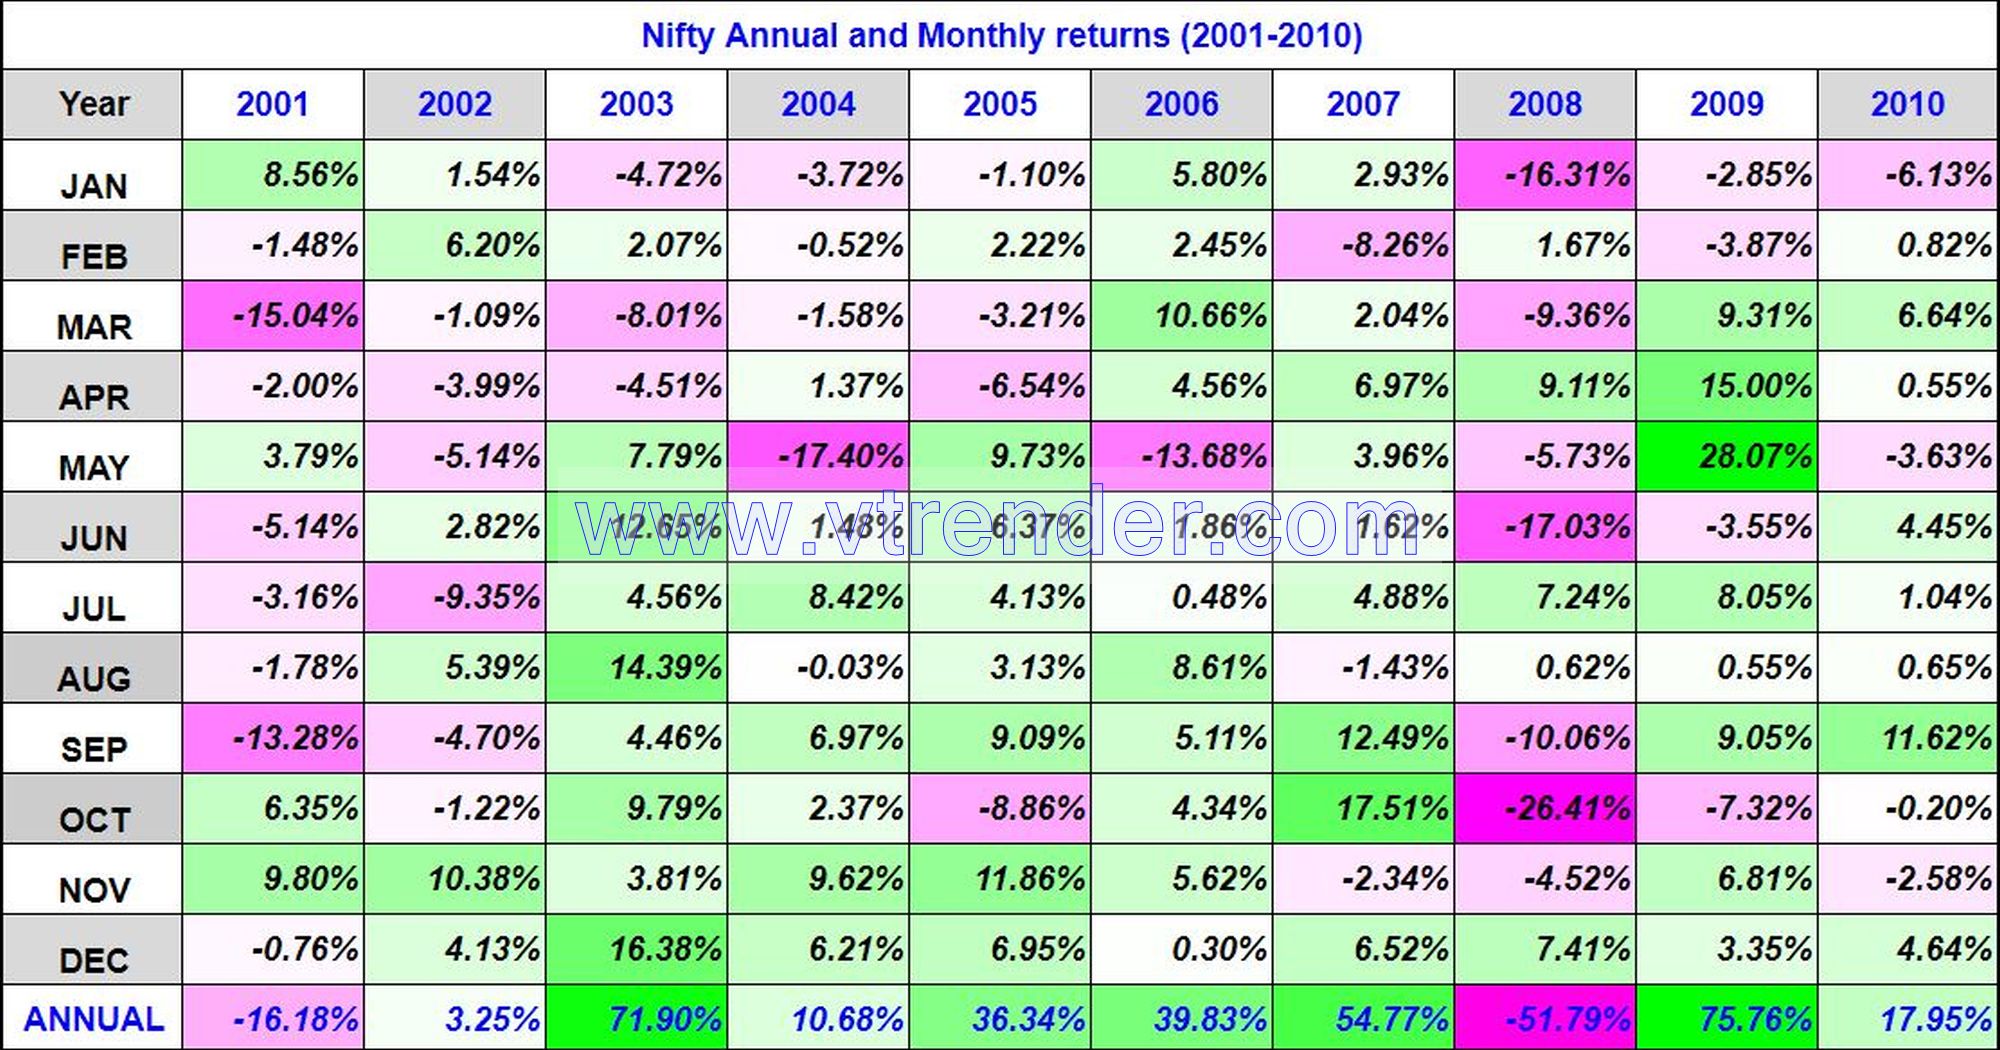 Niftyreturns2001 2010 Nifty 50 Monthly And Annual Returns (1991-2022) - 30Th Sep 2022 Annual, Monthly, Nifty Returns